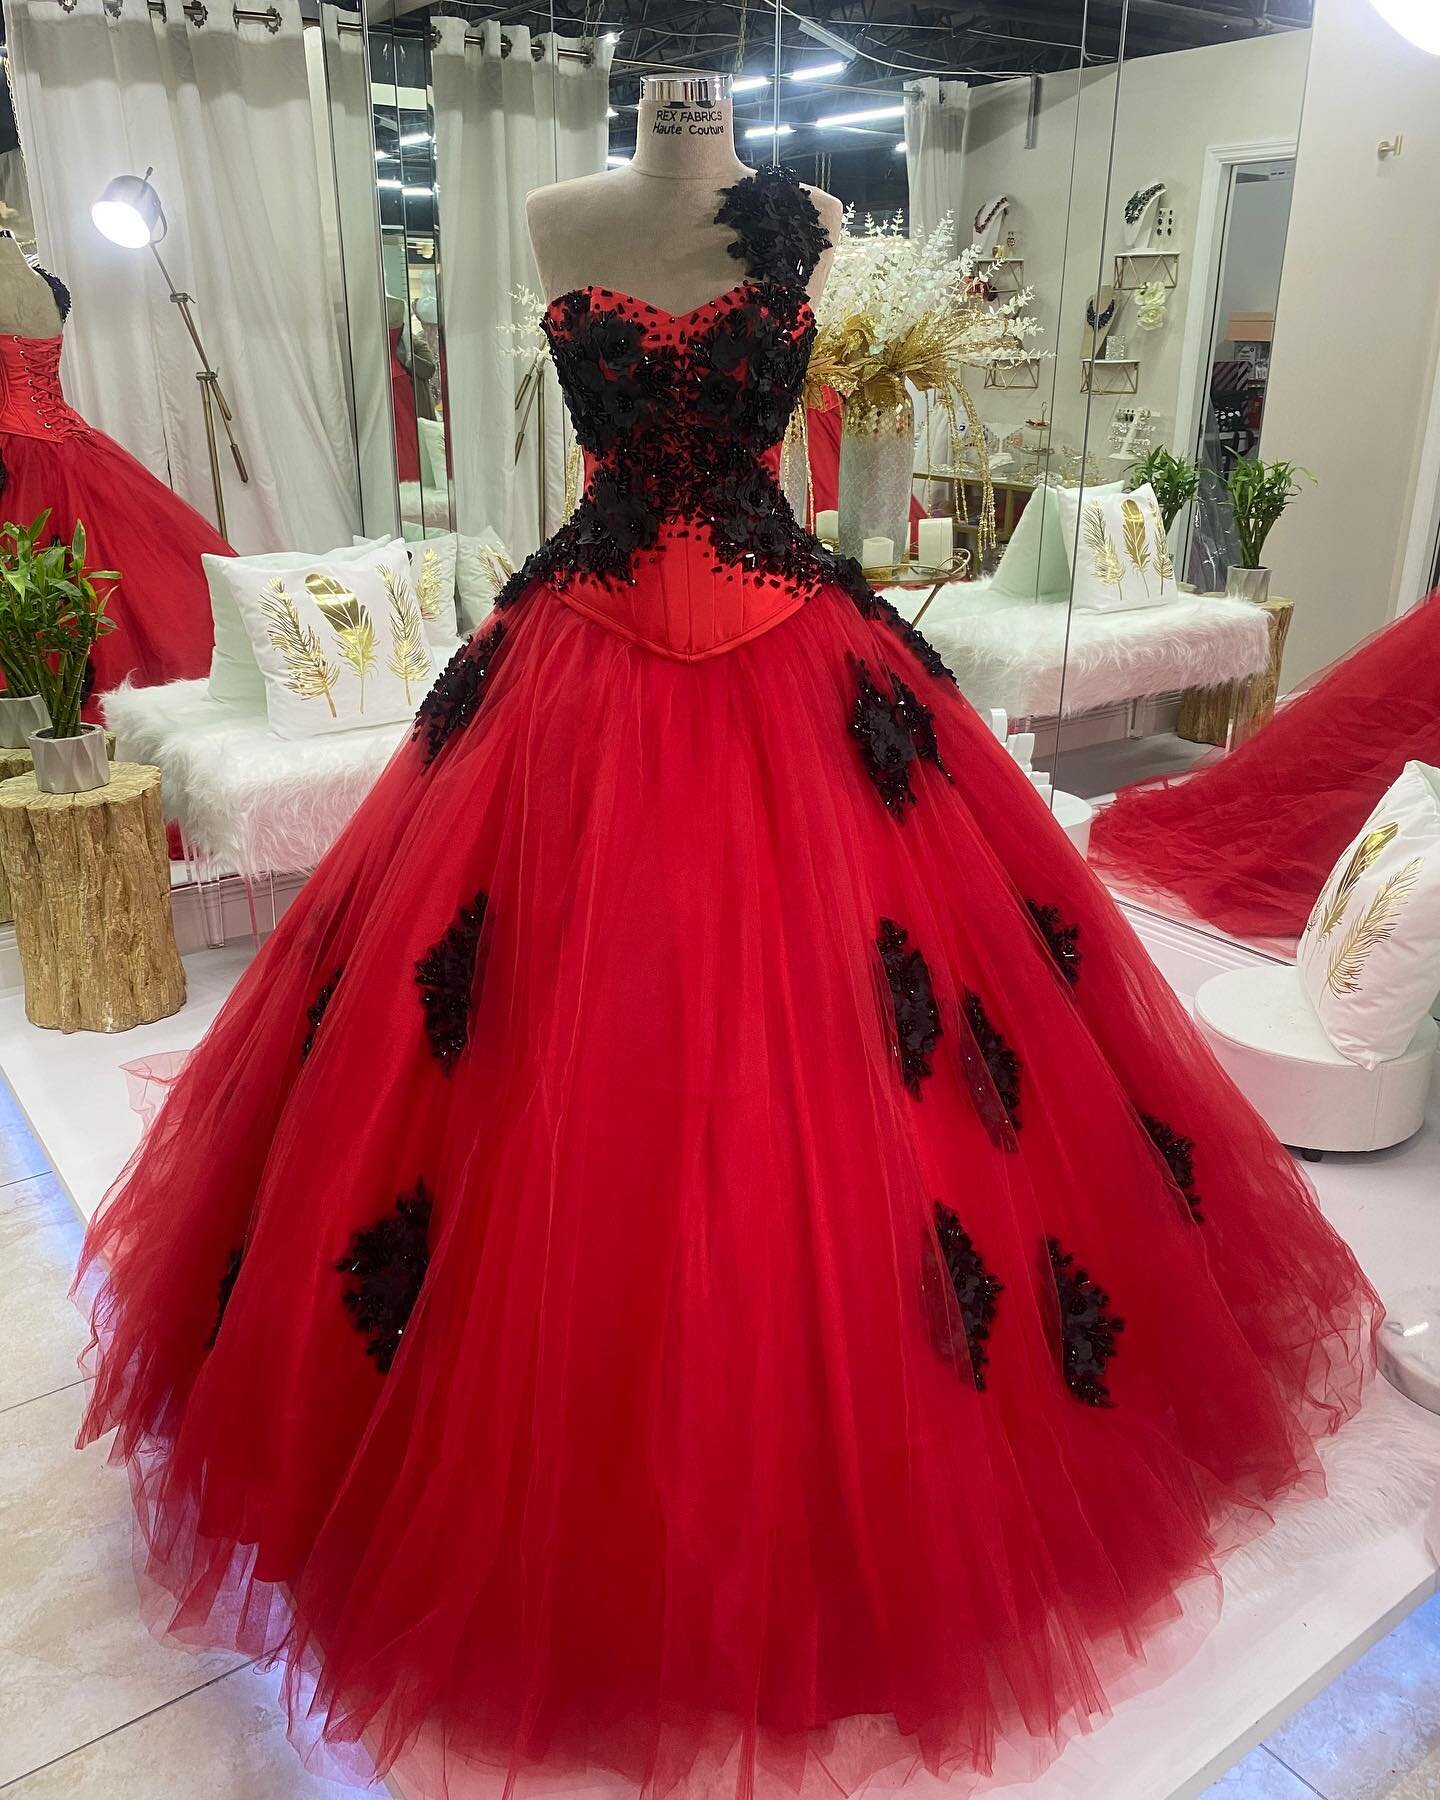 red and black,who would&rsquo;ve thought it would be so beautiful!
&bull;
&bull;
&bull;
&bull;

#quince#quinceañeramiami #quinceañera #quincedress #miami#miamidresses #miamidressrental#southflorida #dresses #gowns #dressrental #quinceañeras #quinc